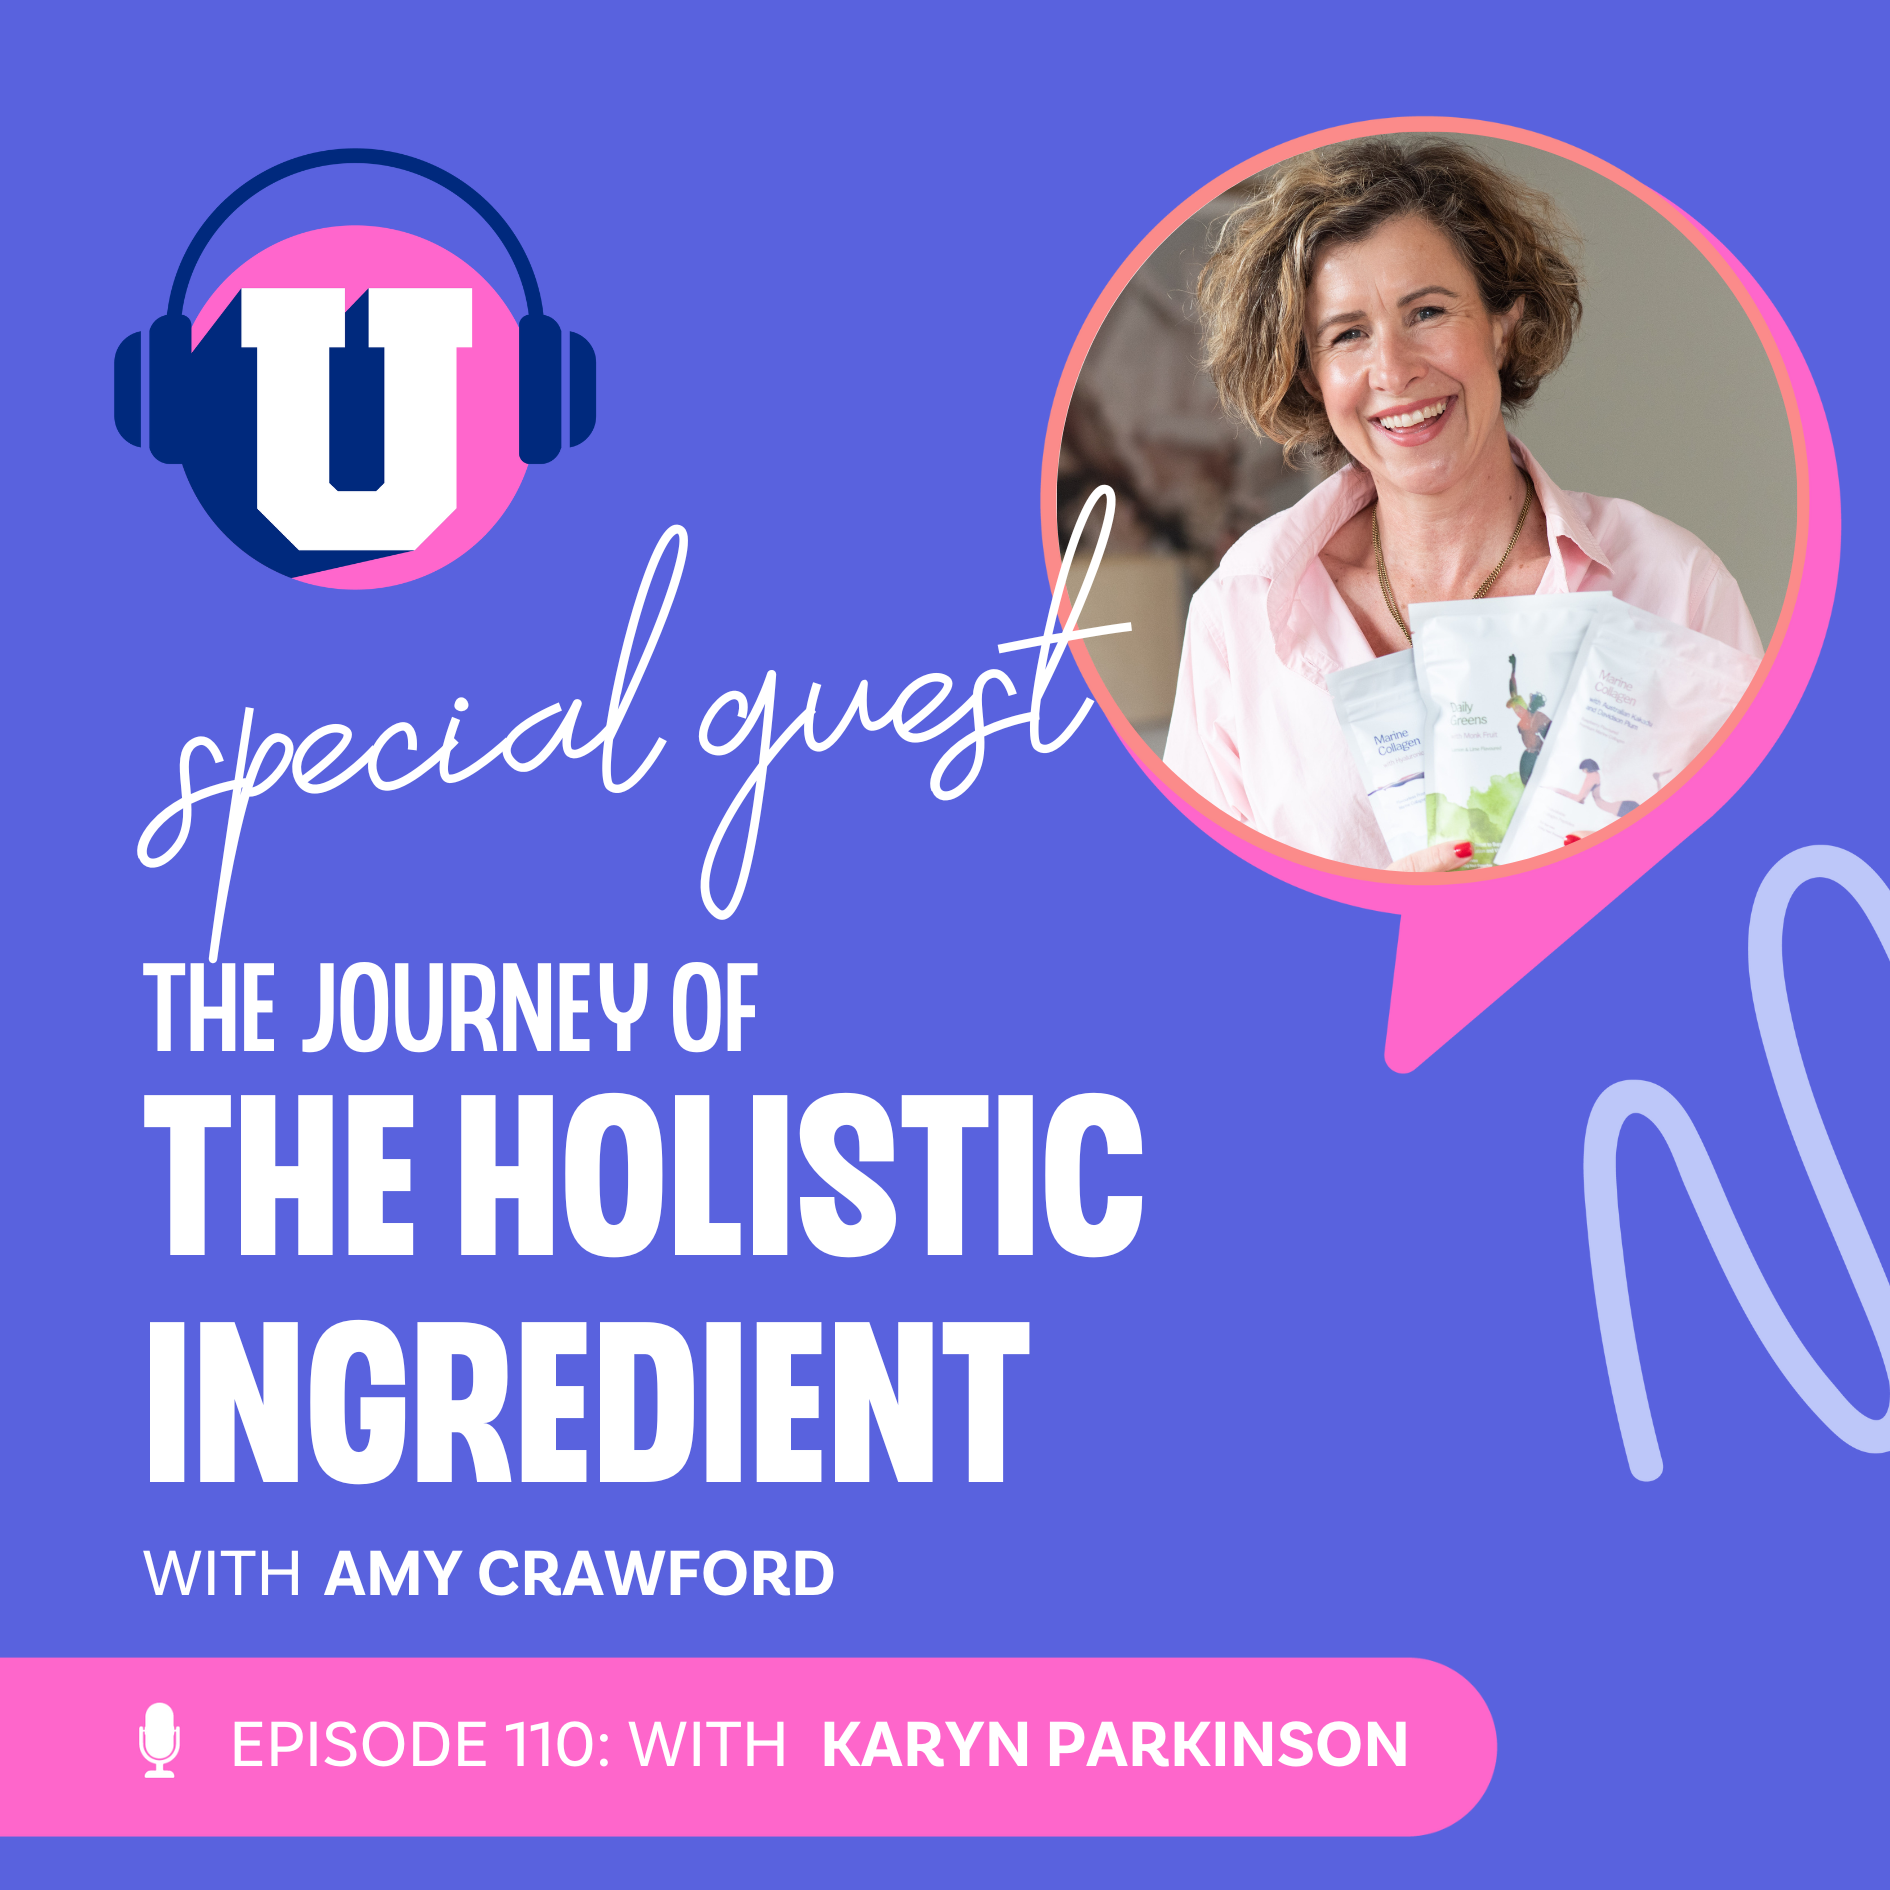 The journey of the Holistic Ingredient with Amy Crawford